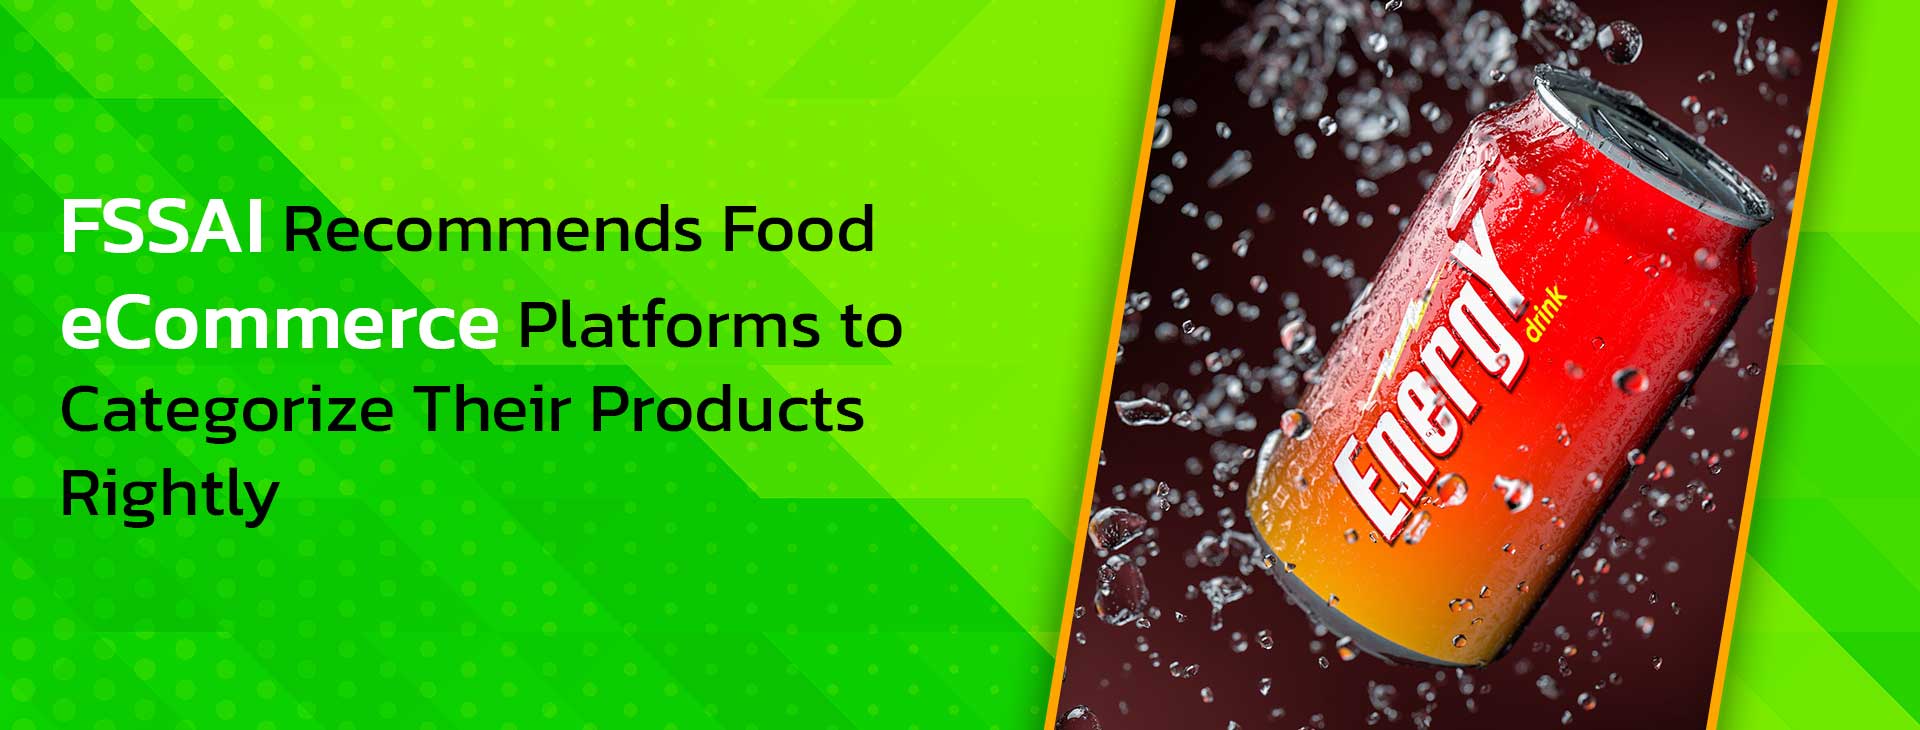 FSSAI Recommends Food E-Commerce Platforms to Categorize Their Products Rightly